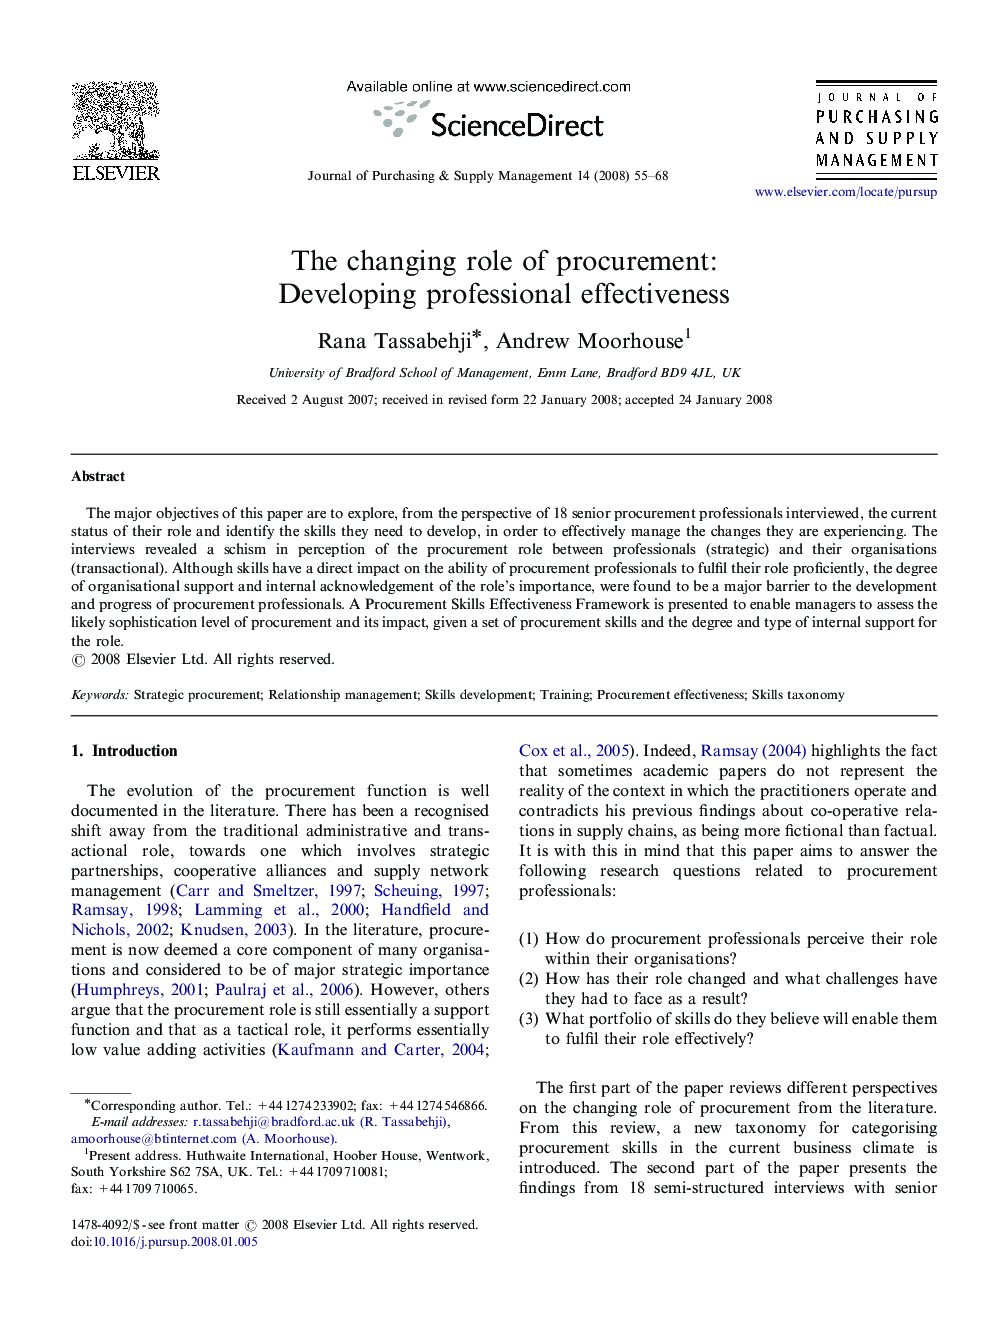 The changing role of procurement: Developing professional effectiveness